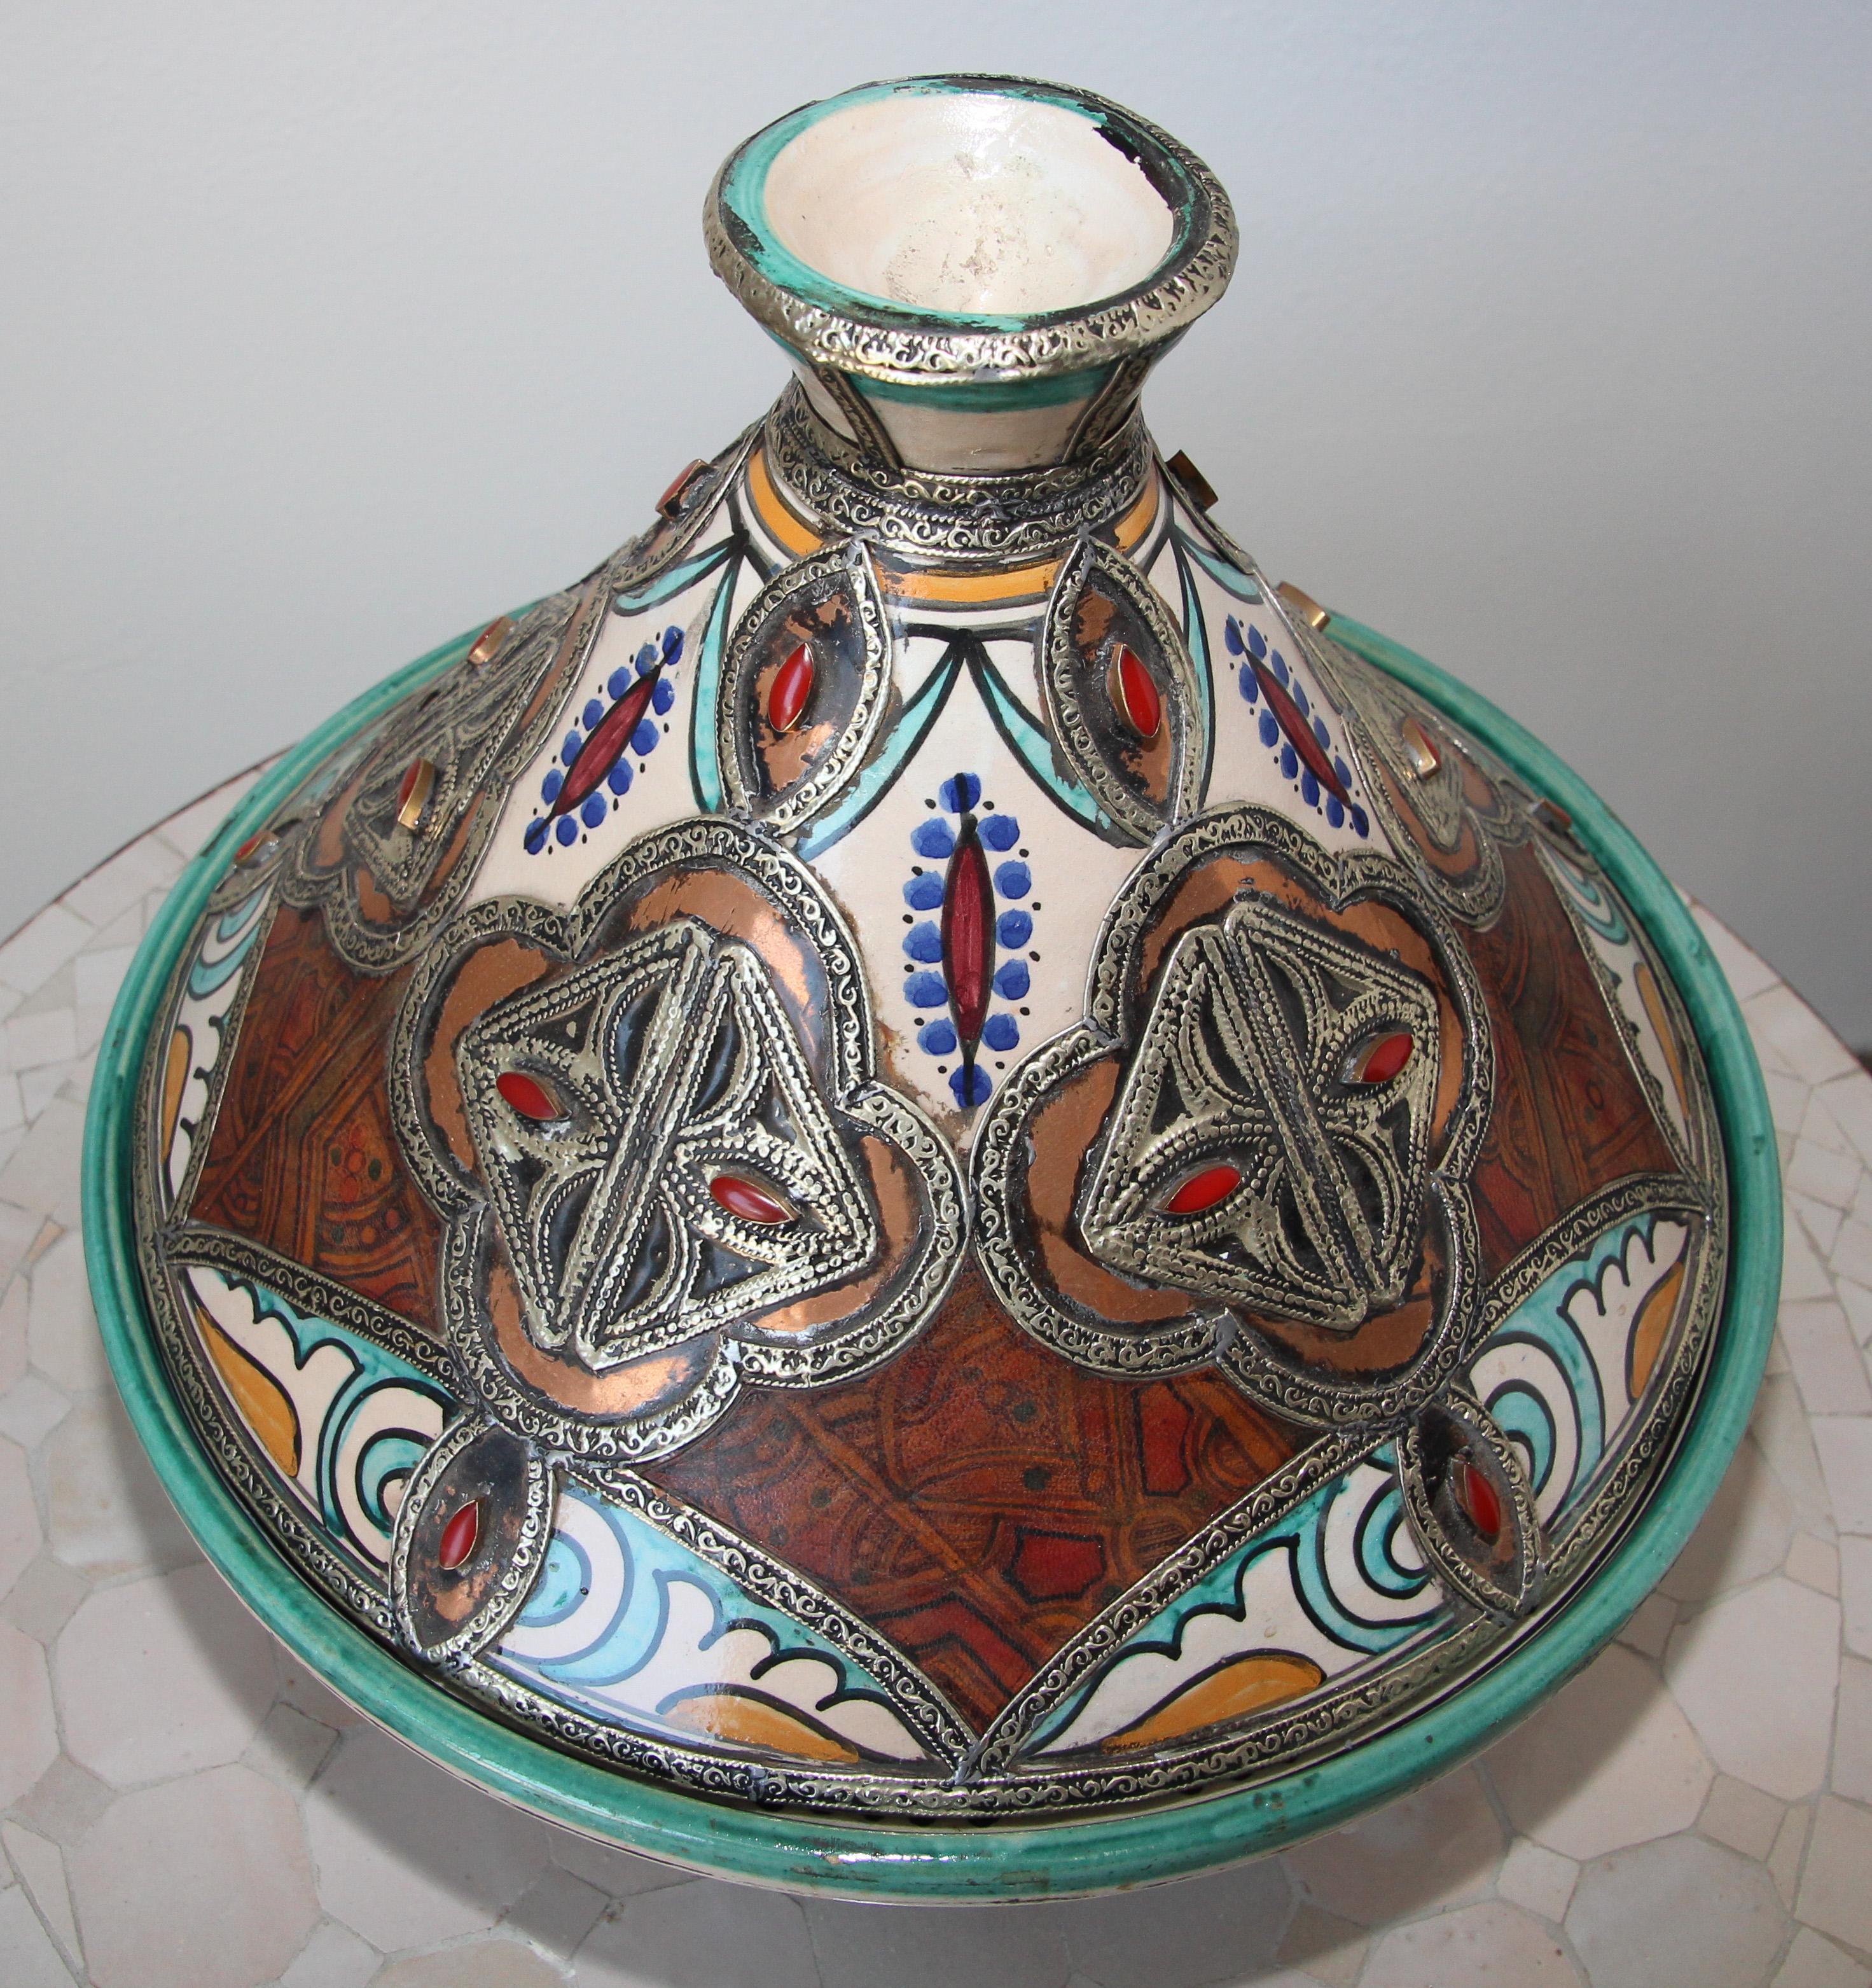 Moroccan Moorish Ceramic Bowl with Lid, Tajine from Fez In Good Condition For Sale In North Hollywood, CA